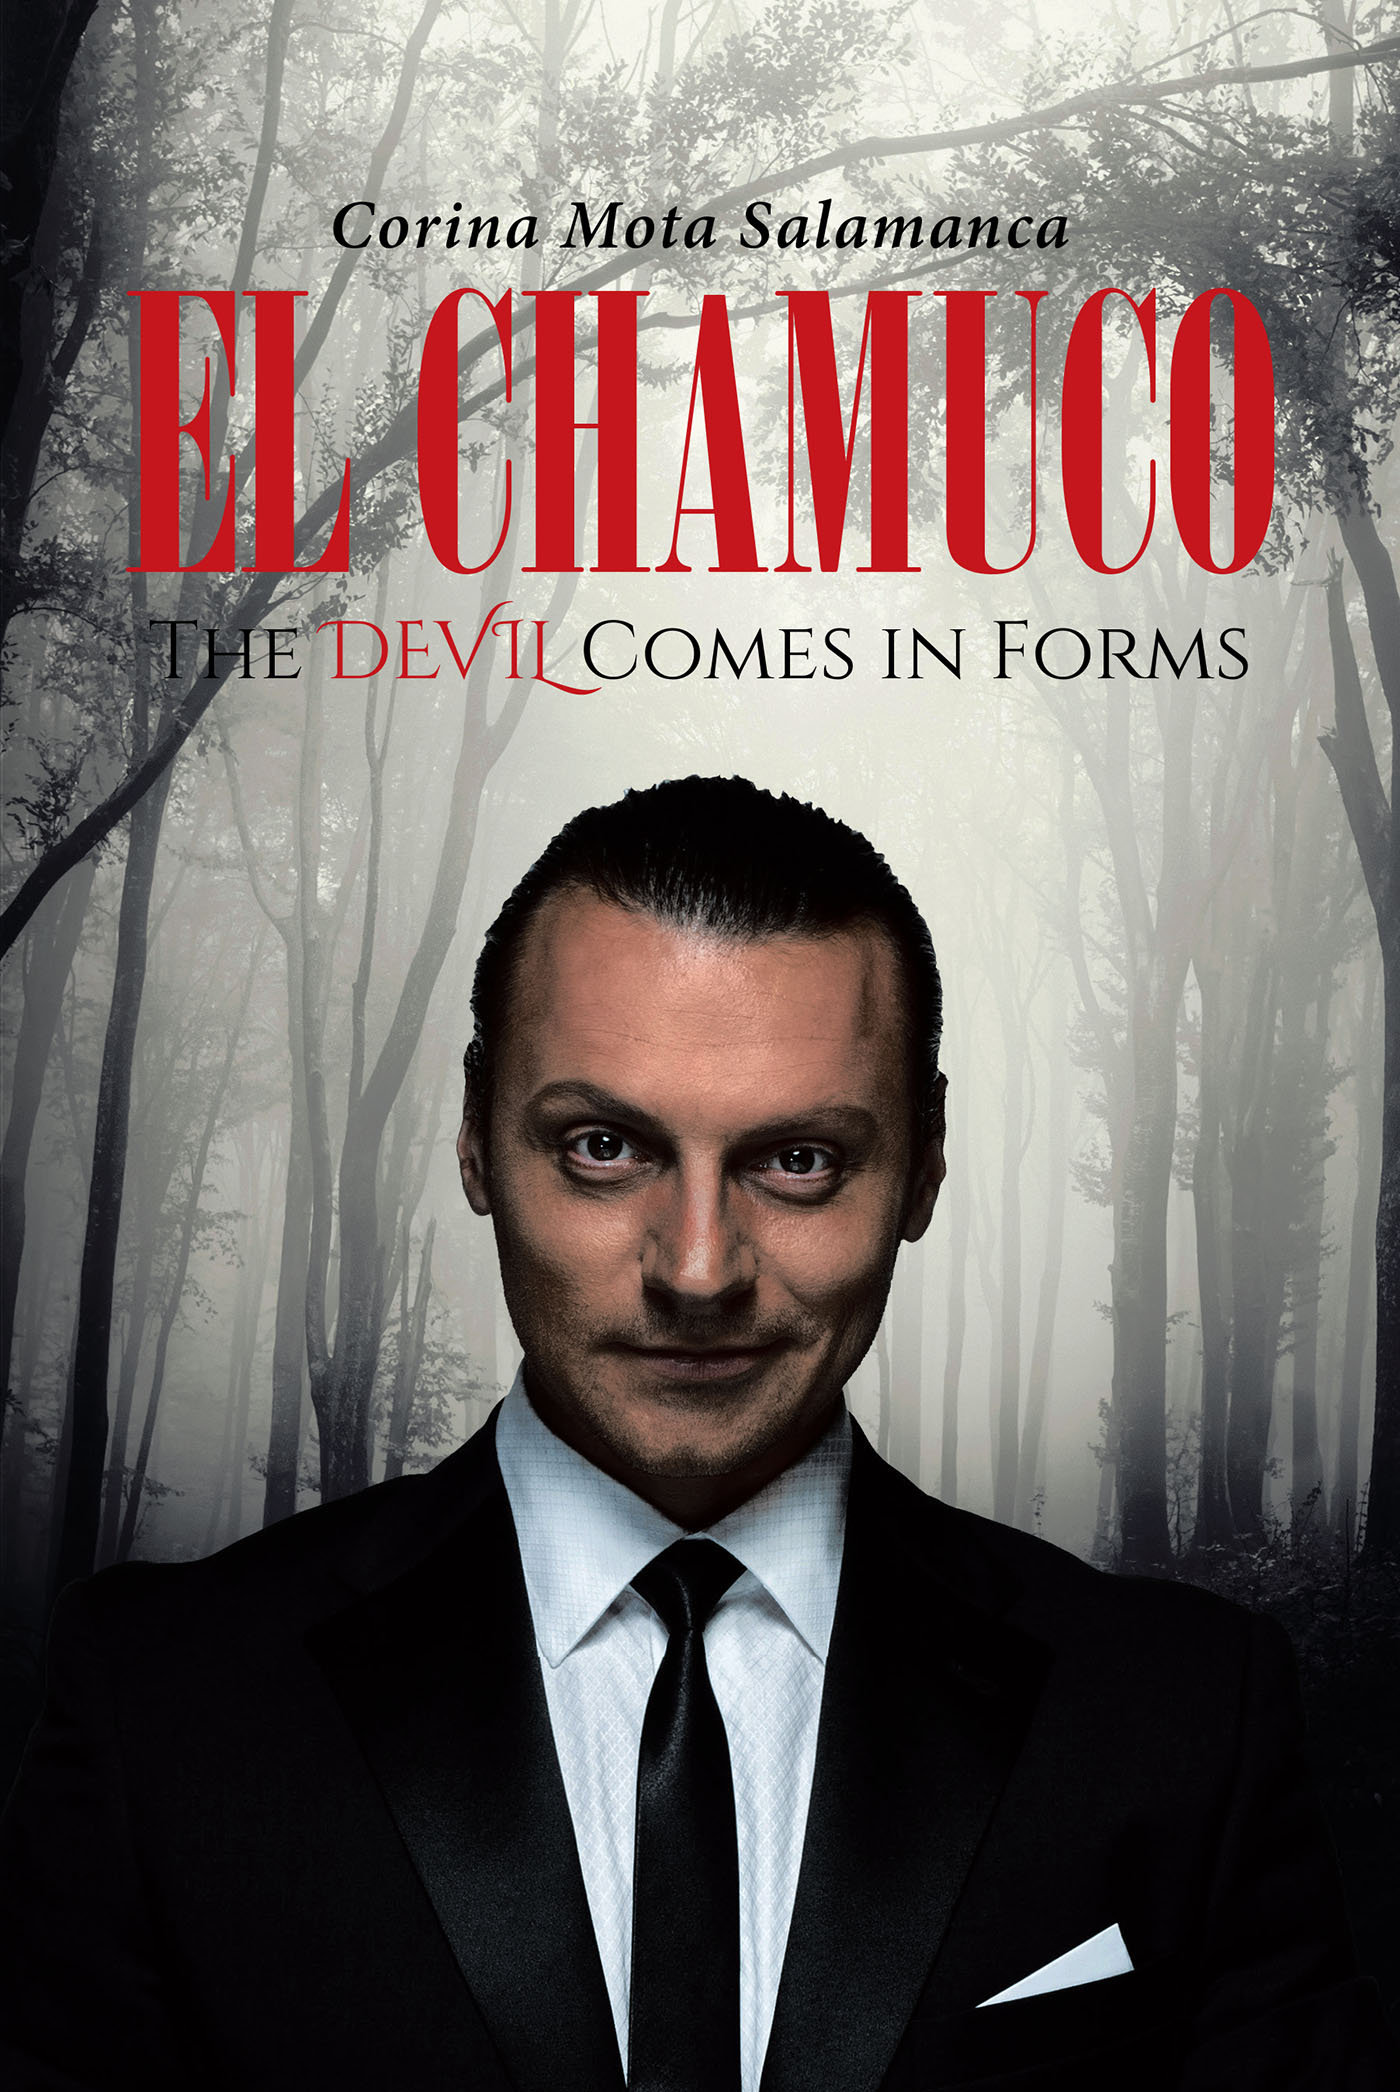 Author Corina Mota Salamanca’s New Book "El Chamuco: The Devil Comes in Forms" is a Compilation of Modern Short Fiction Offering Unnerving Encounters with the Paranormal